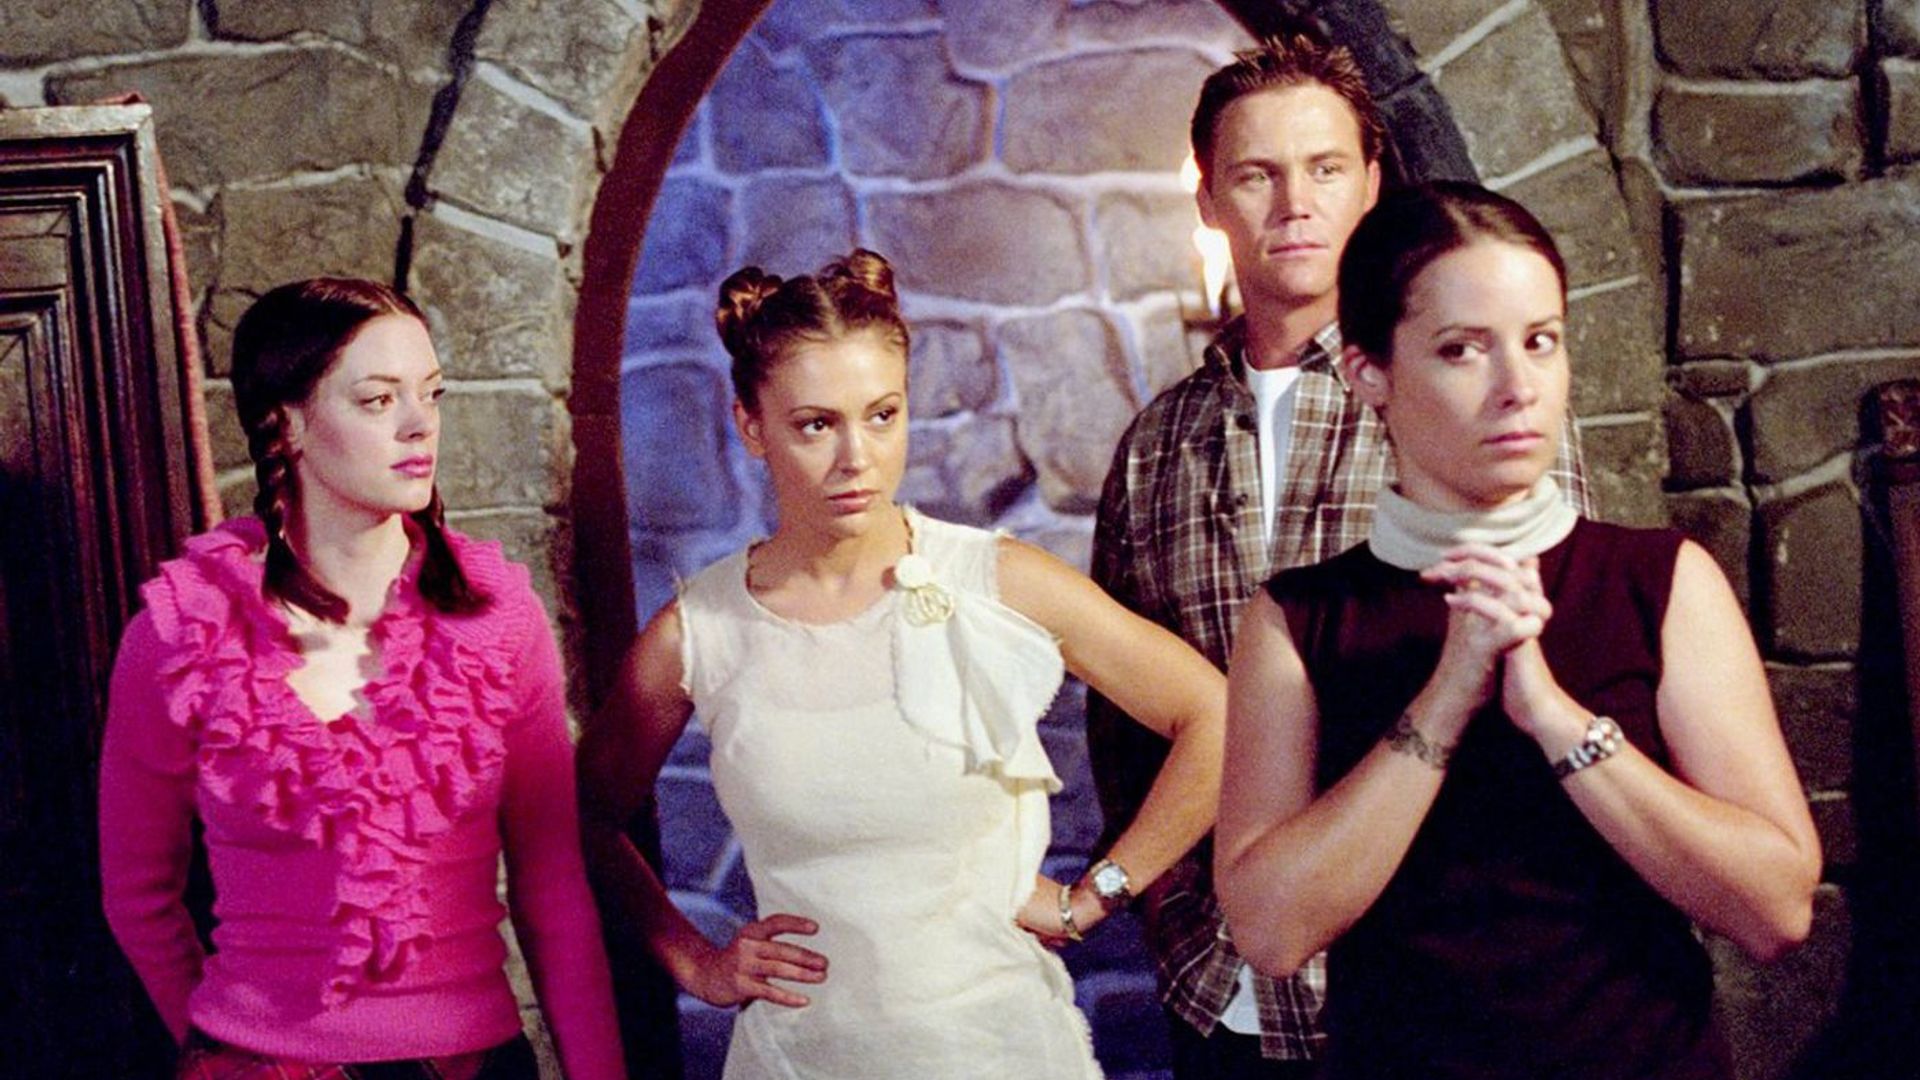 Charmed background